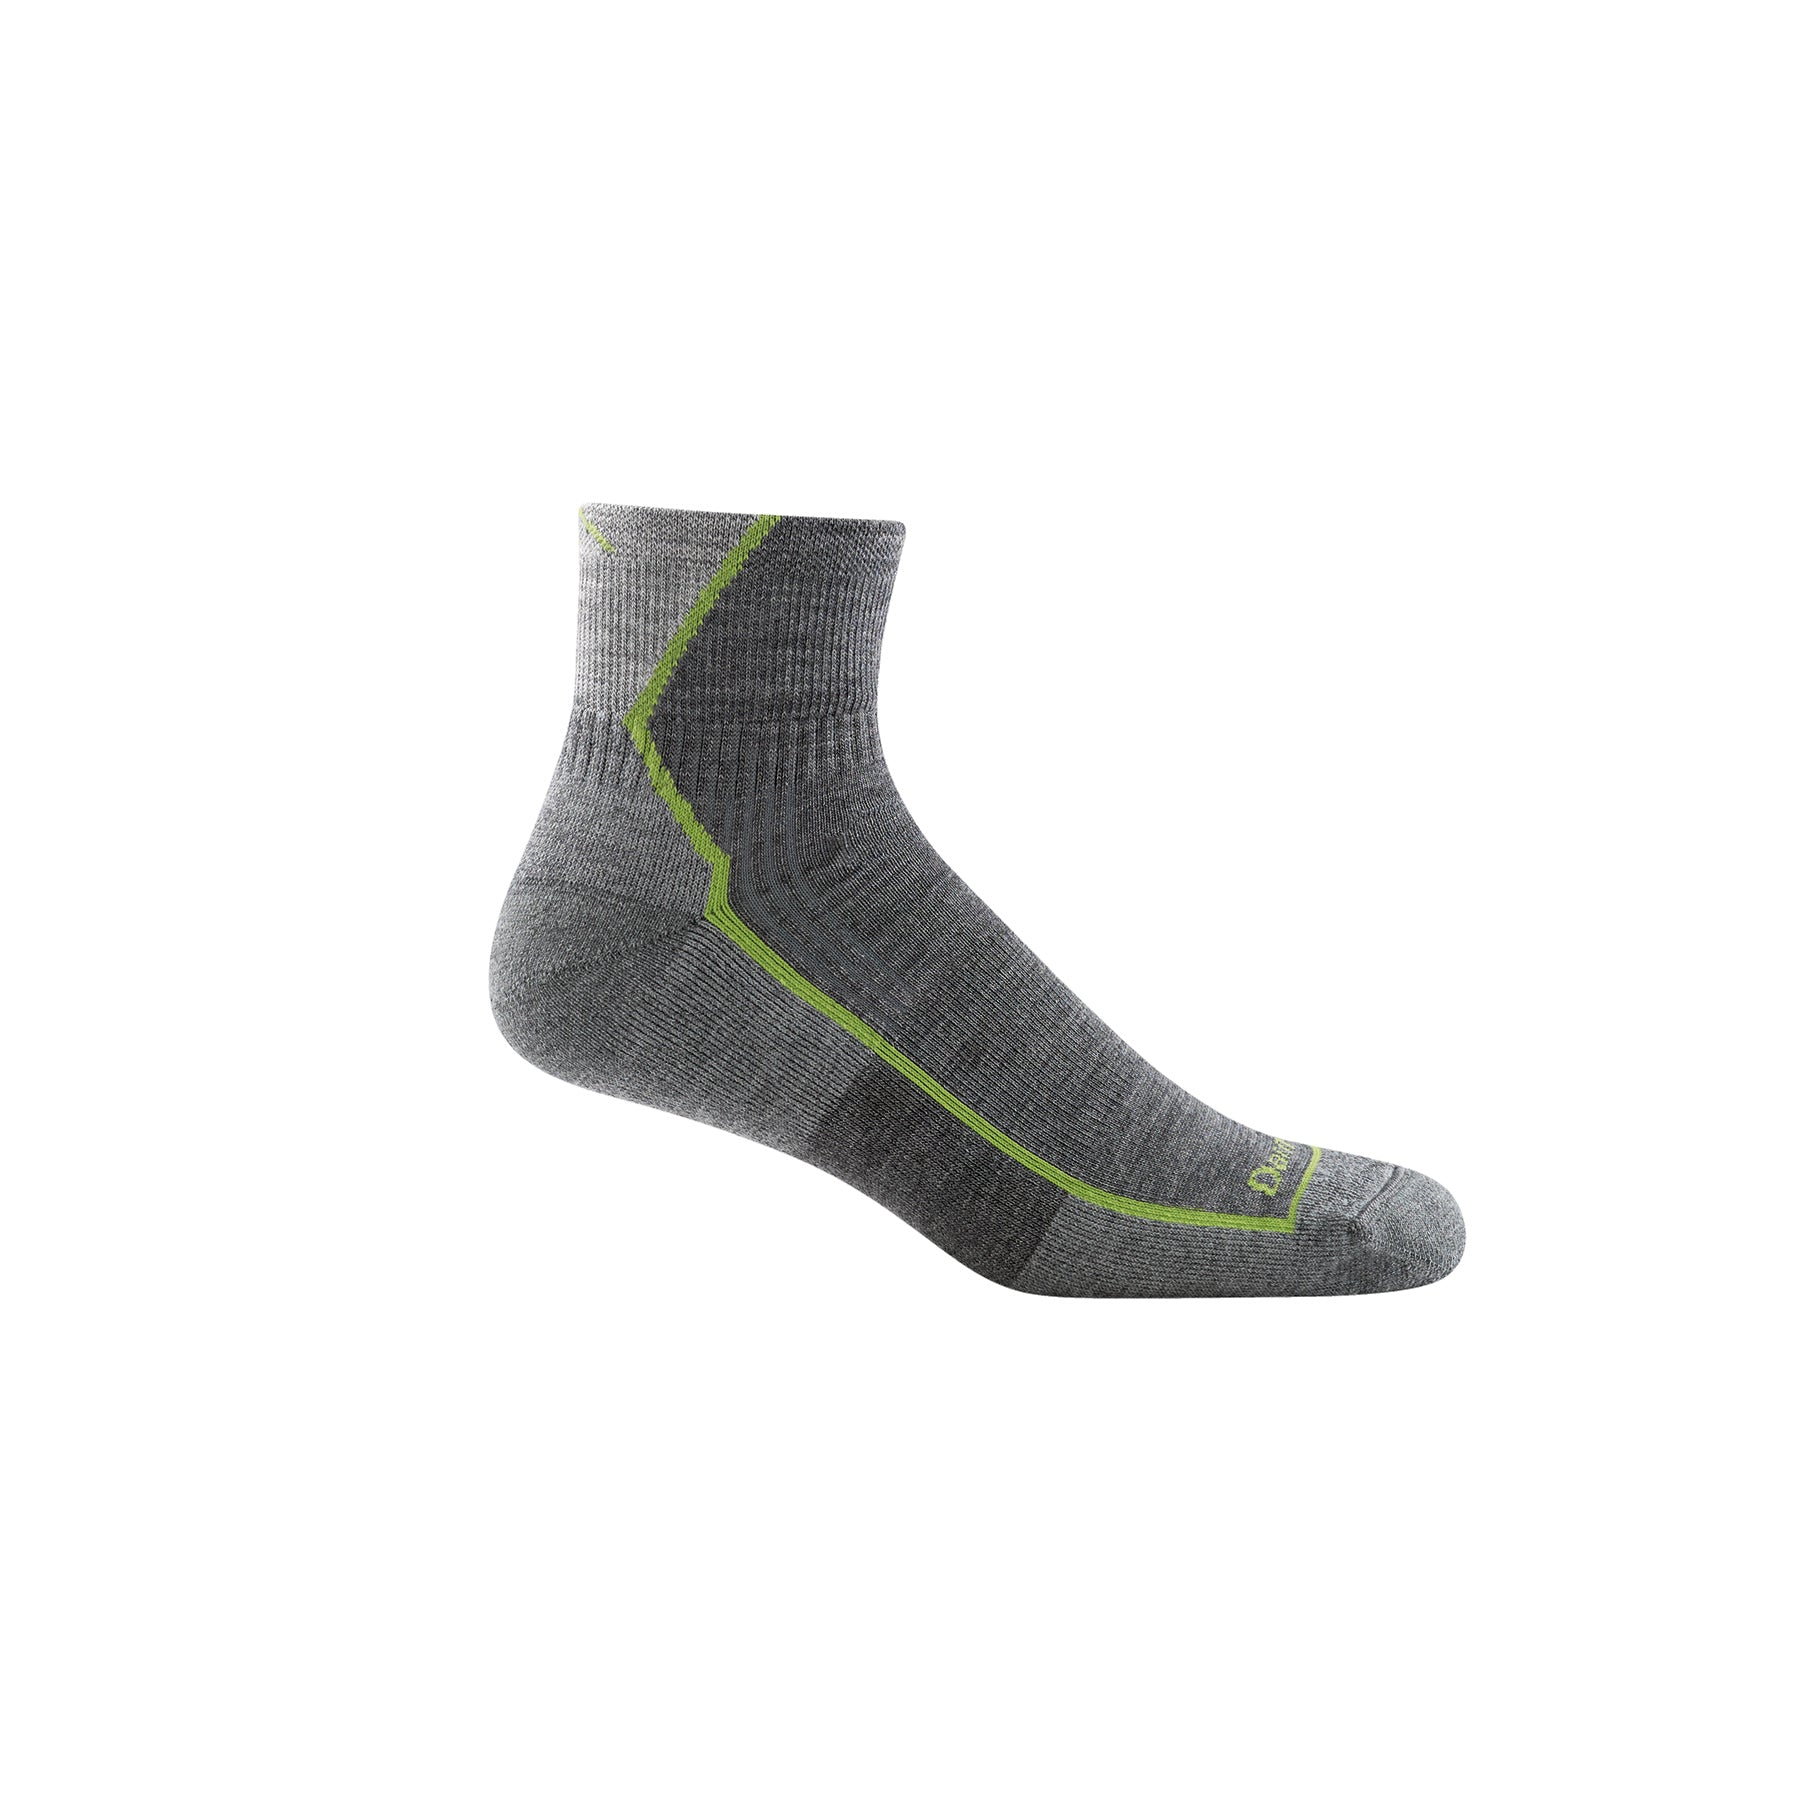 sideview of 1/4 length mens sock in light and dark grey with green stripe